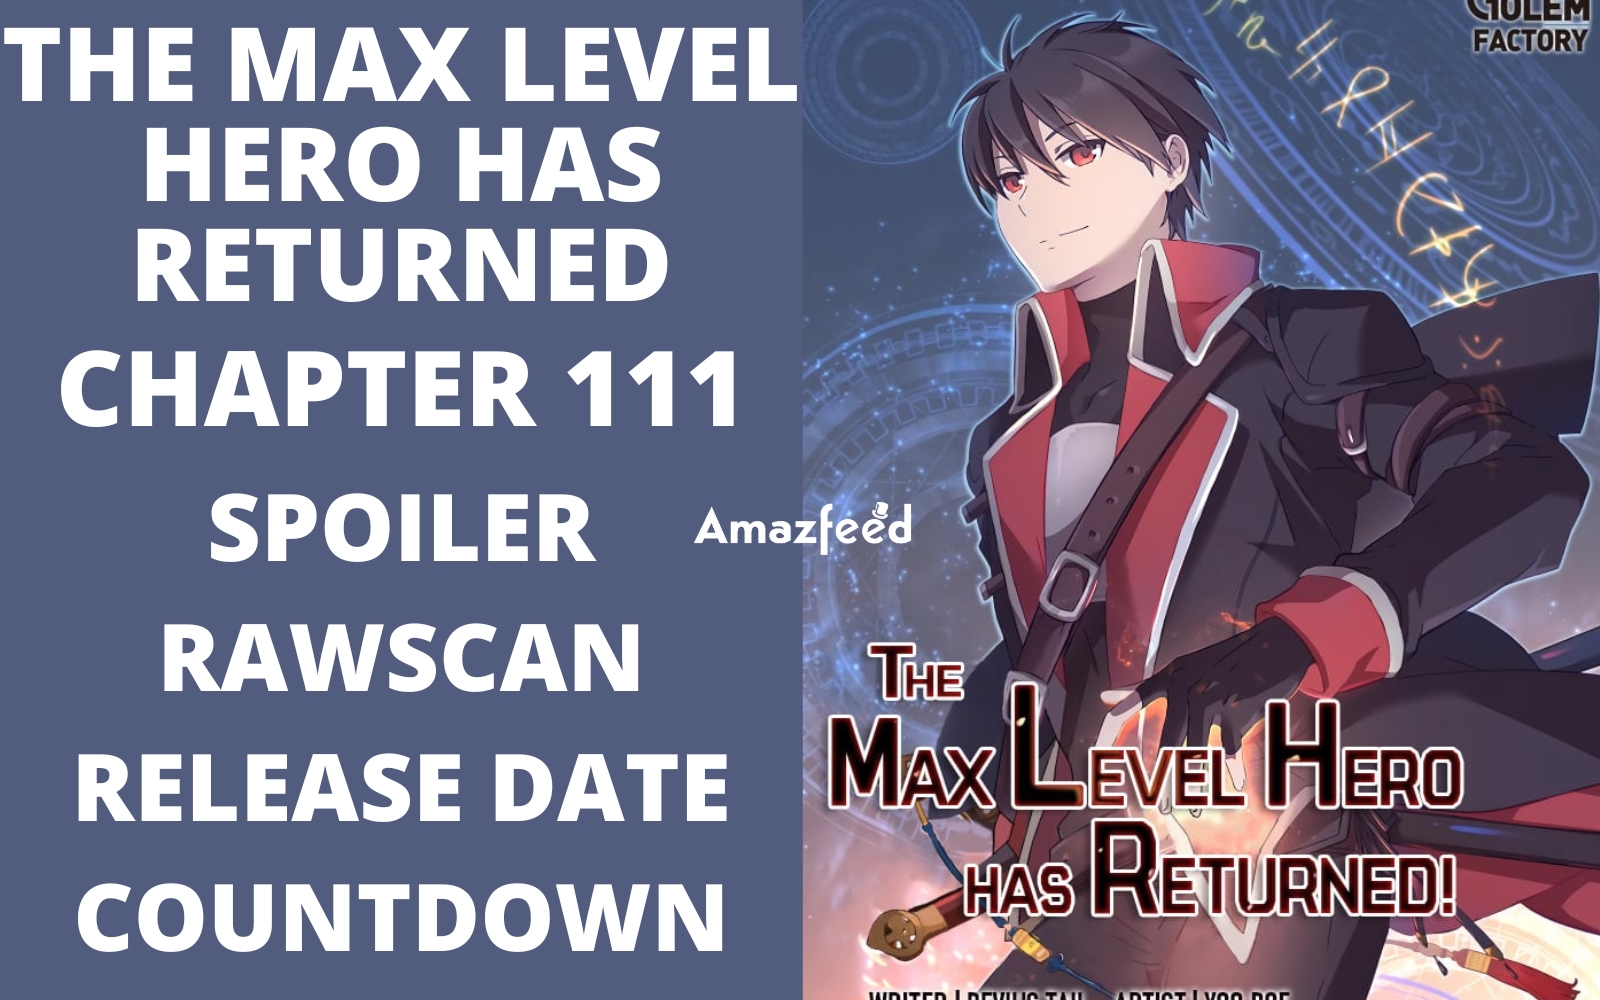 The Max Level Hero Has Returned Chapter 111 Spoiler, Release Date, Raw Scan, Countdown, Color Page